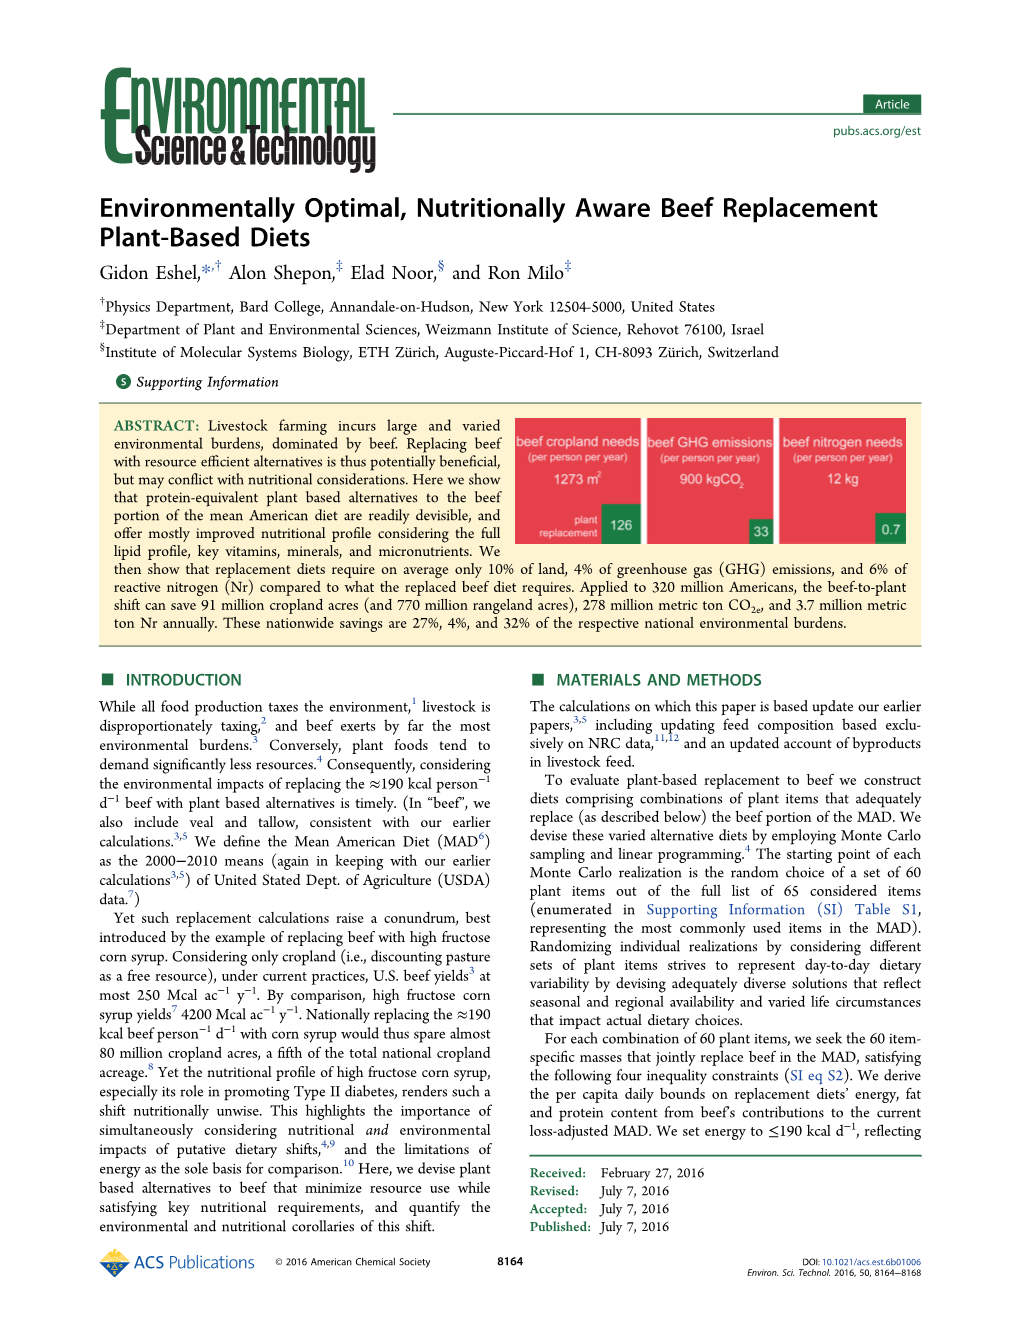 Environmentally Optimal, Nutritionally Aware Beef Replacement Plant-Based Diets Gidon Eshel,*,† Alon Shepon,‡ Elad Noor,§ and Ron Milo‡